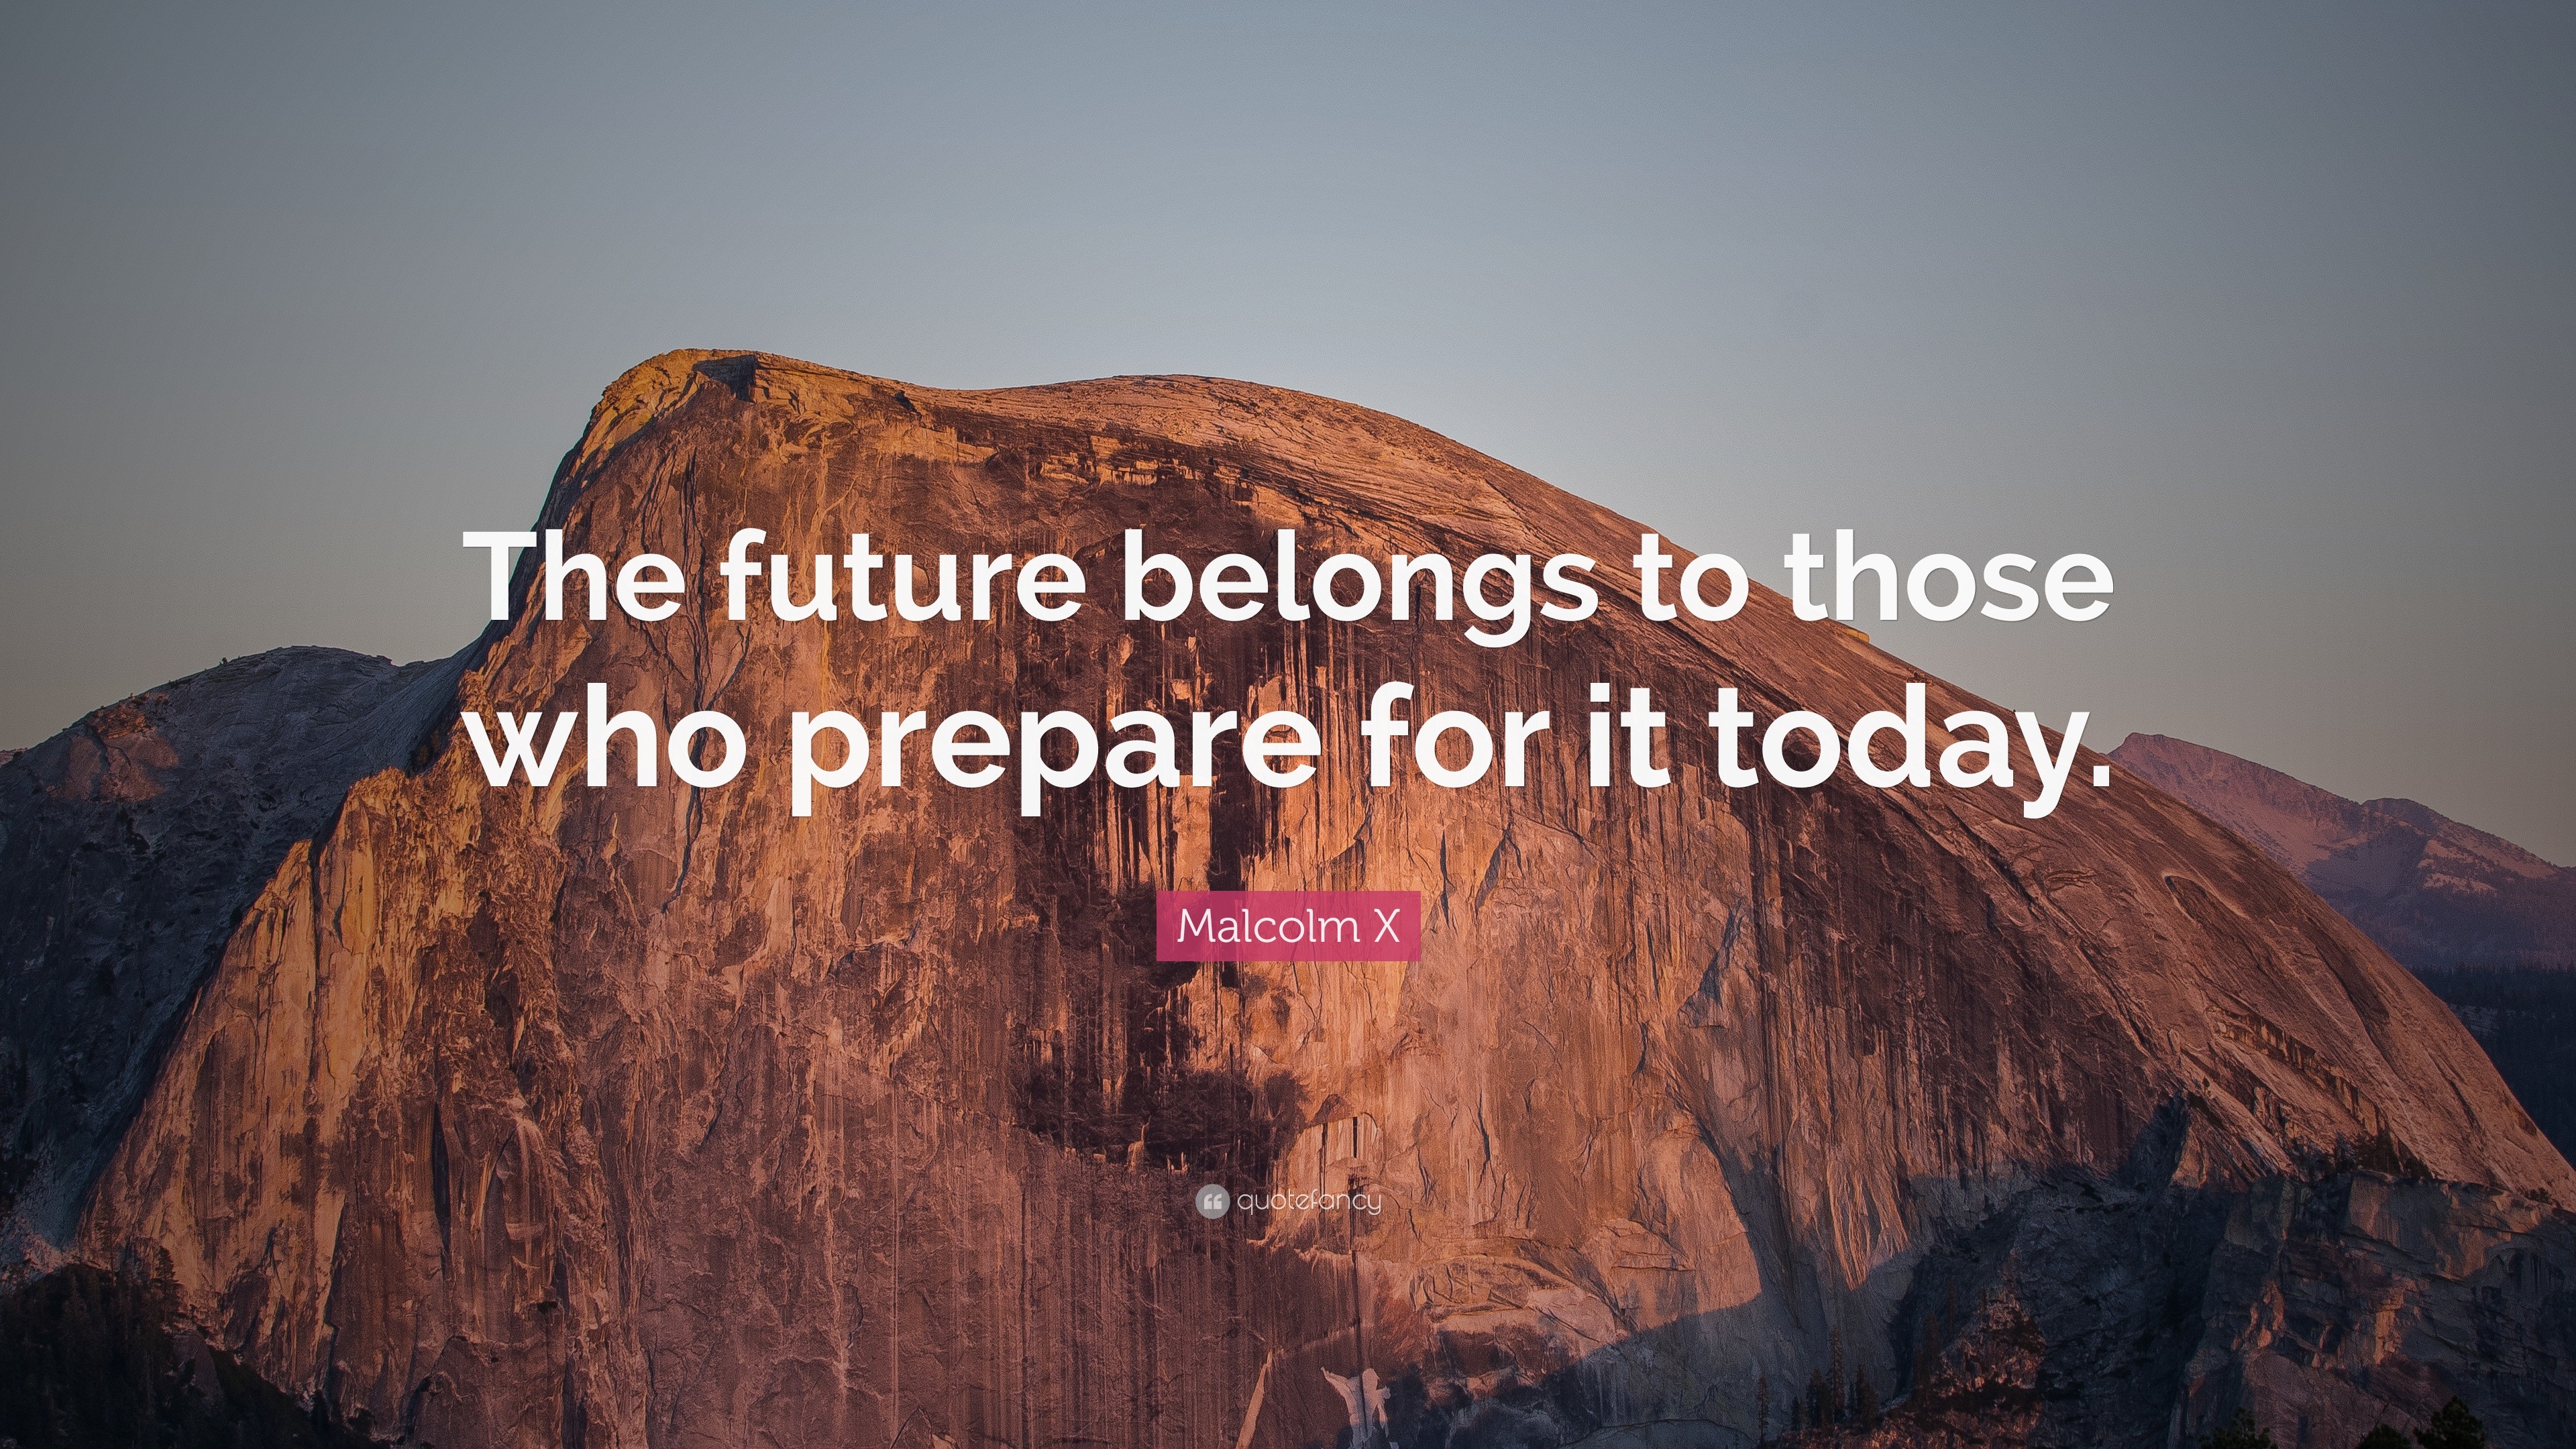 Malcolm X Quote: “The future belongs to those who prepare for it today